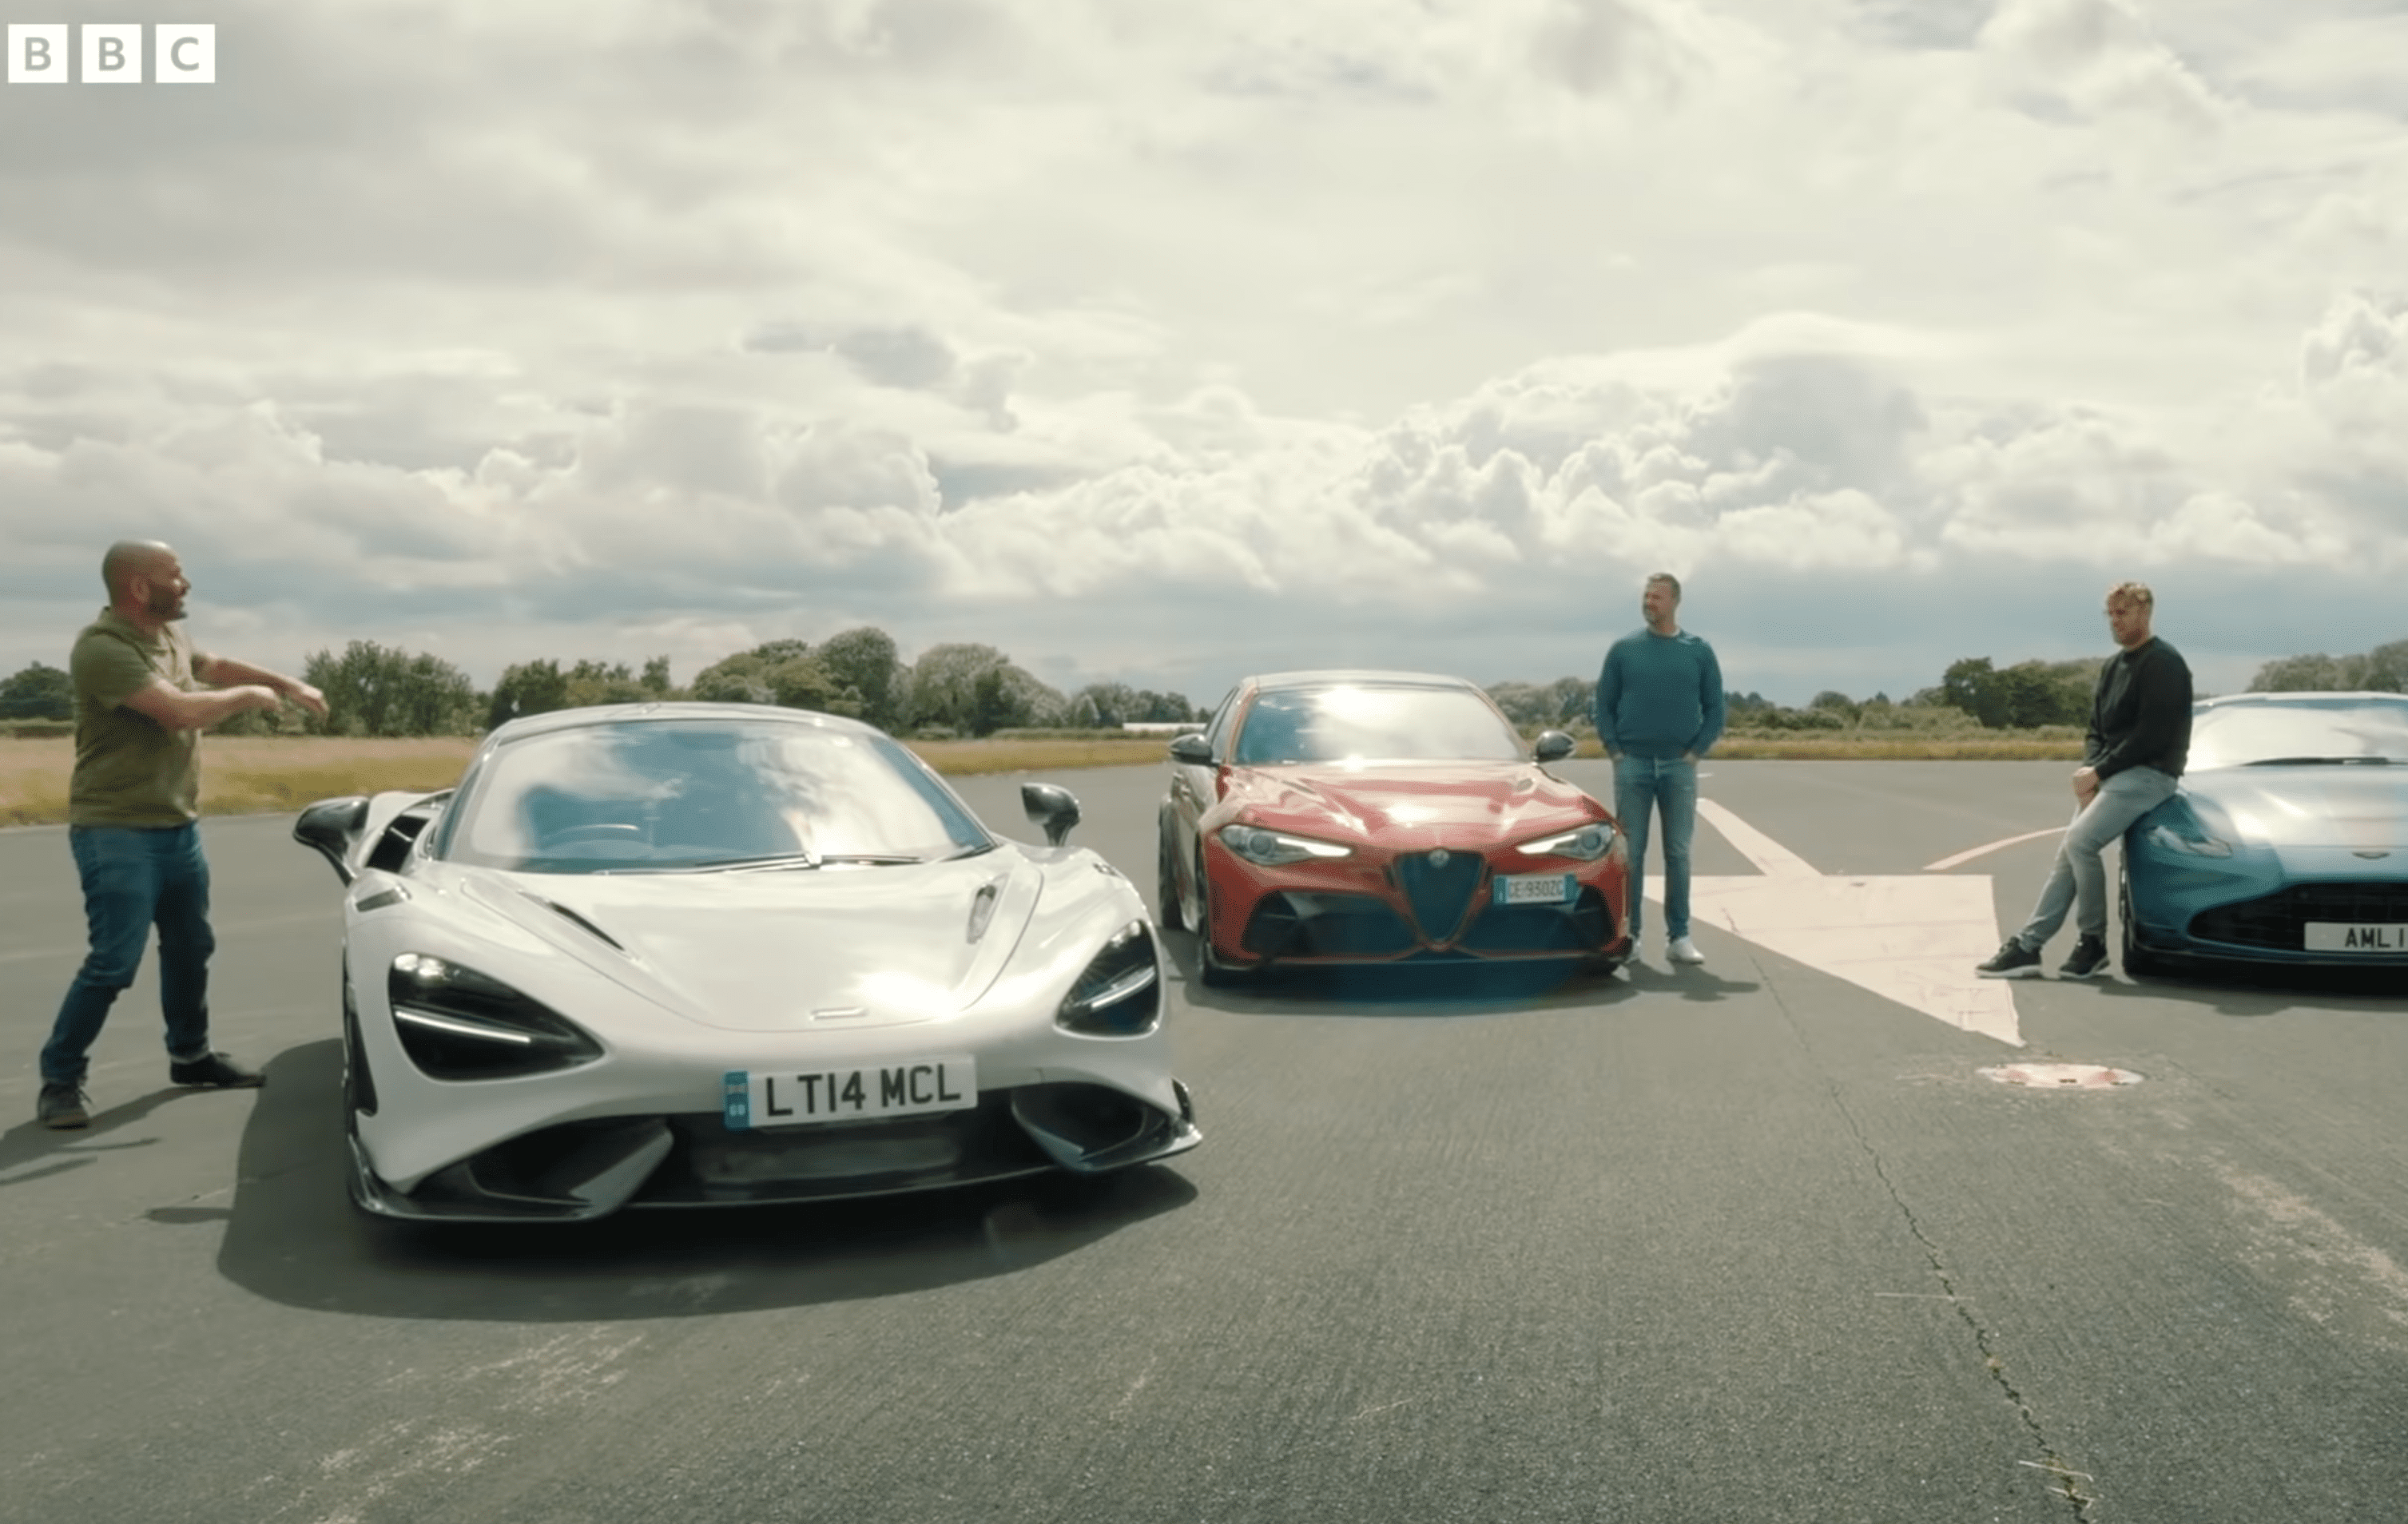 Top Gear is back for Series 31 next month - the interface